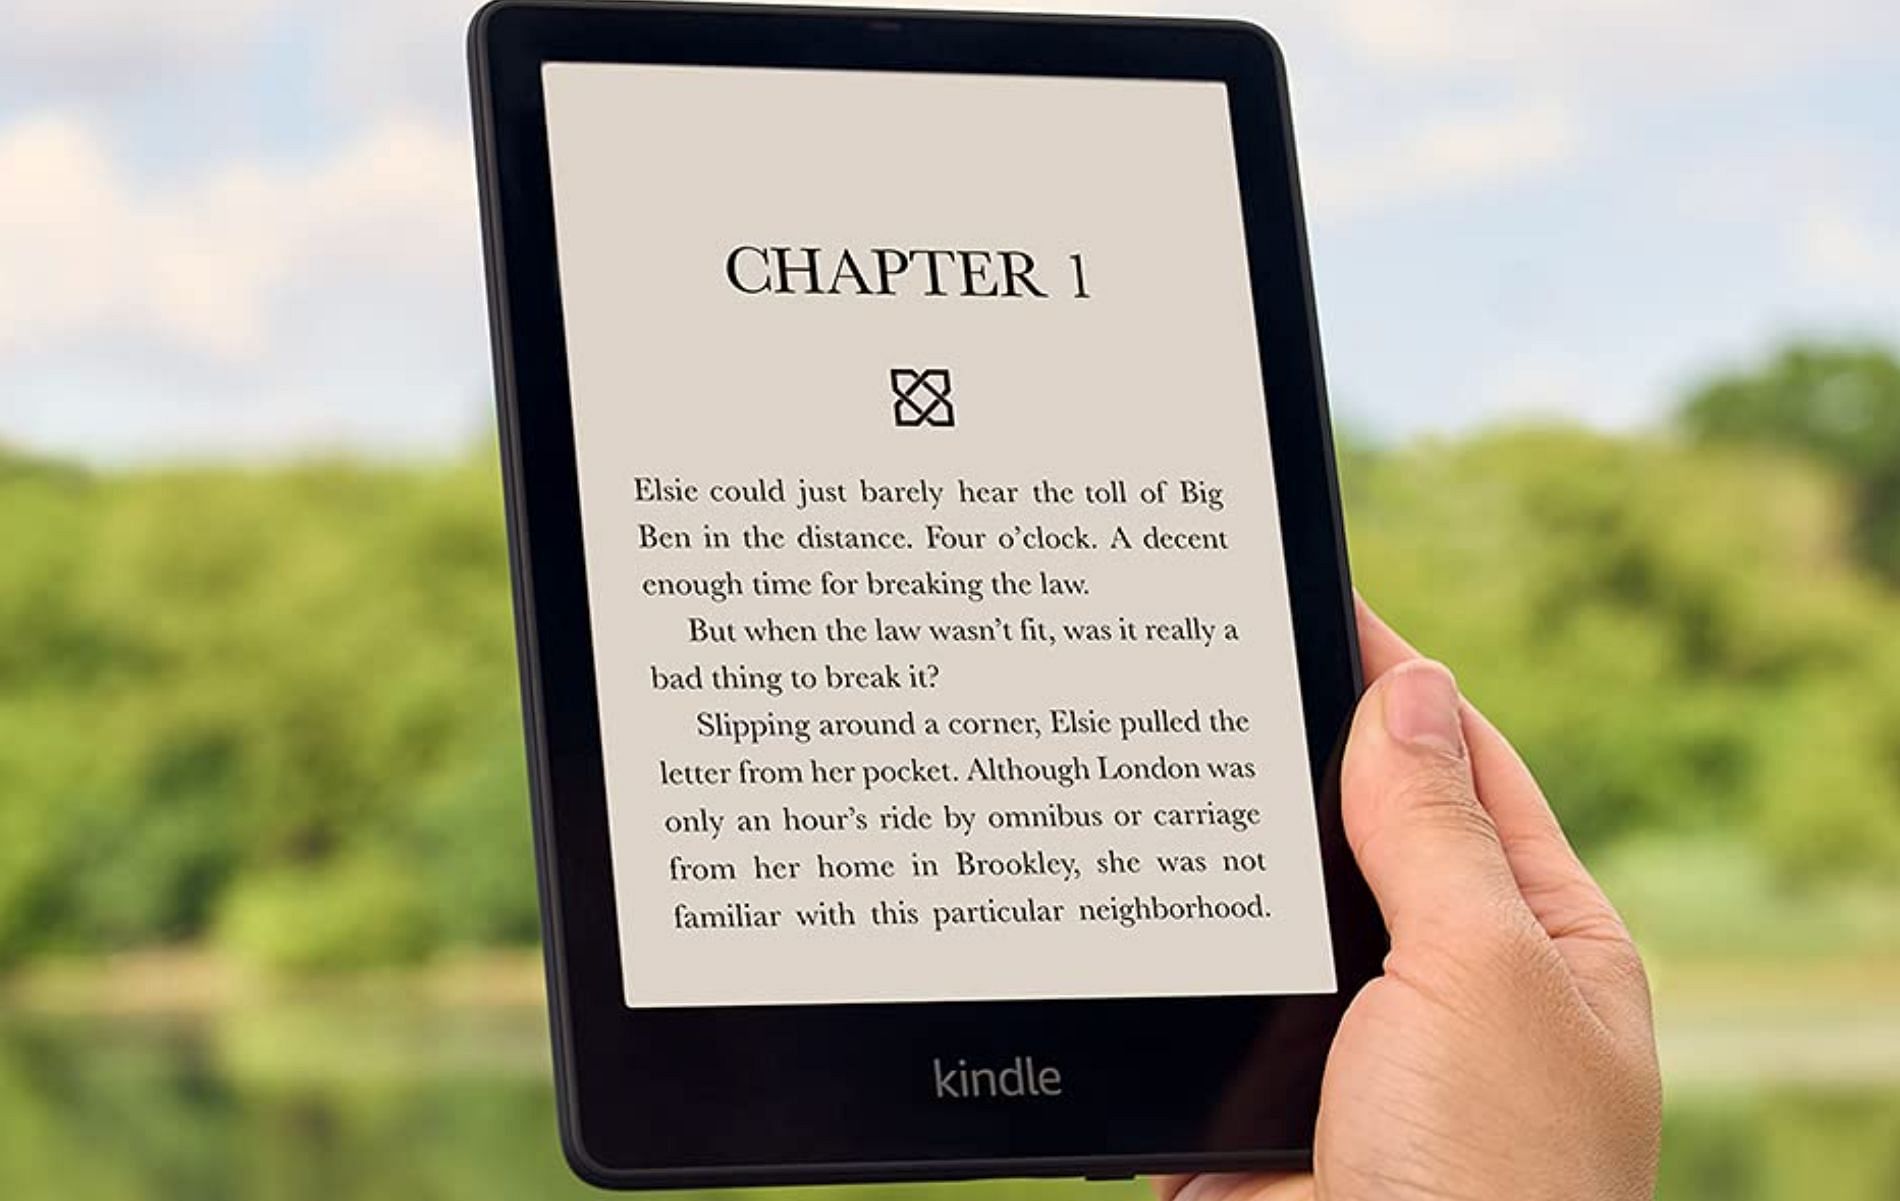 Amazon Kindle Paperwhite is one of the best e-readers to pick in 2023, thanks to its sweet price tag and worthwhile features